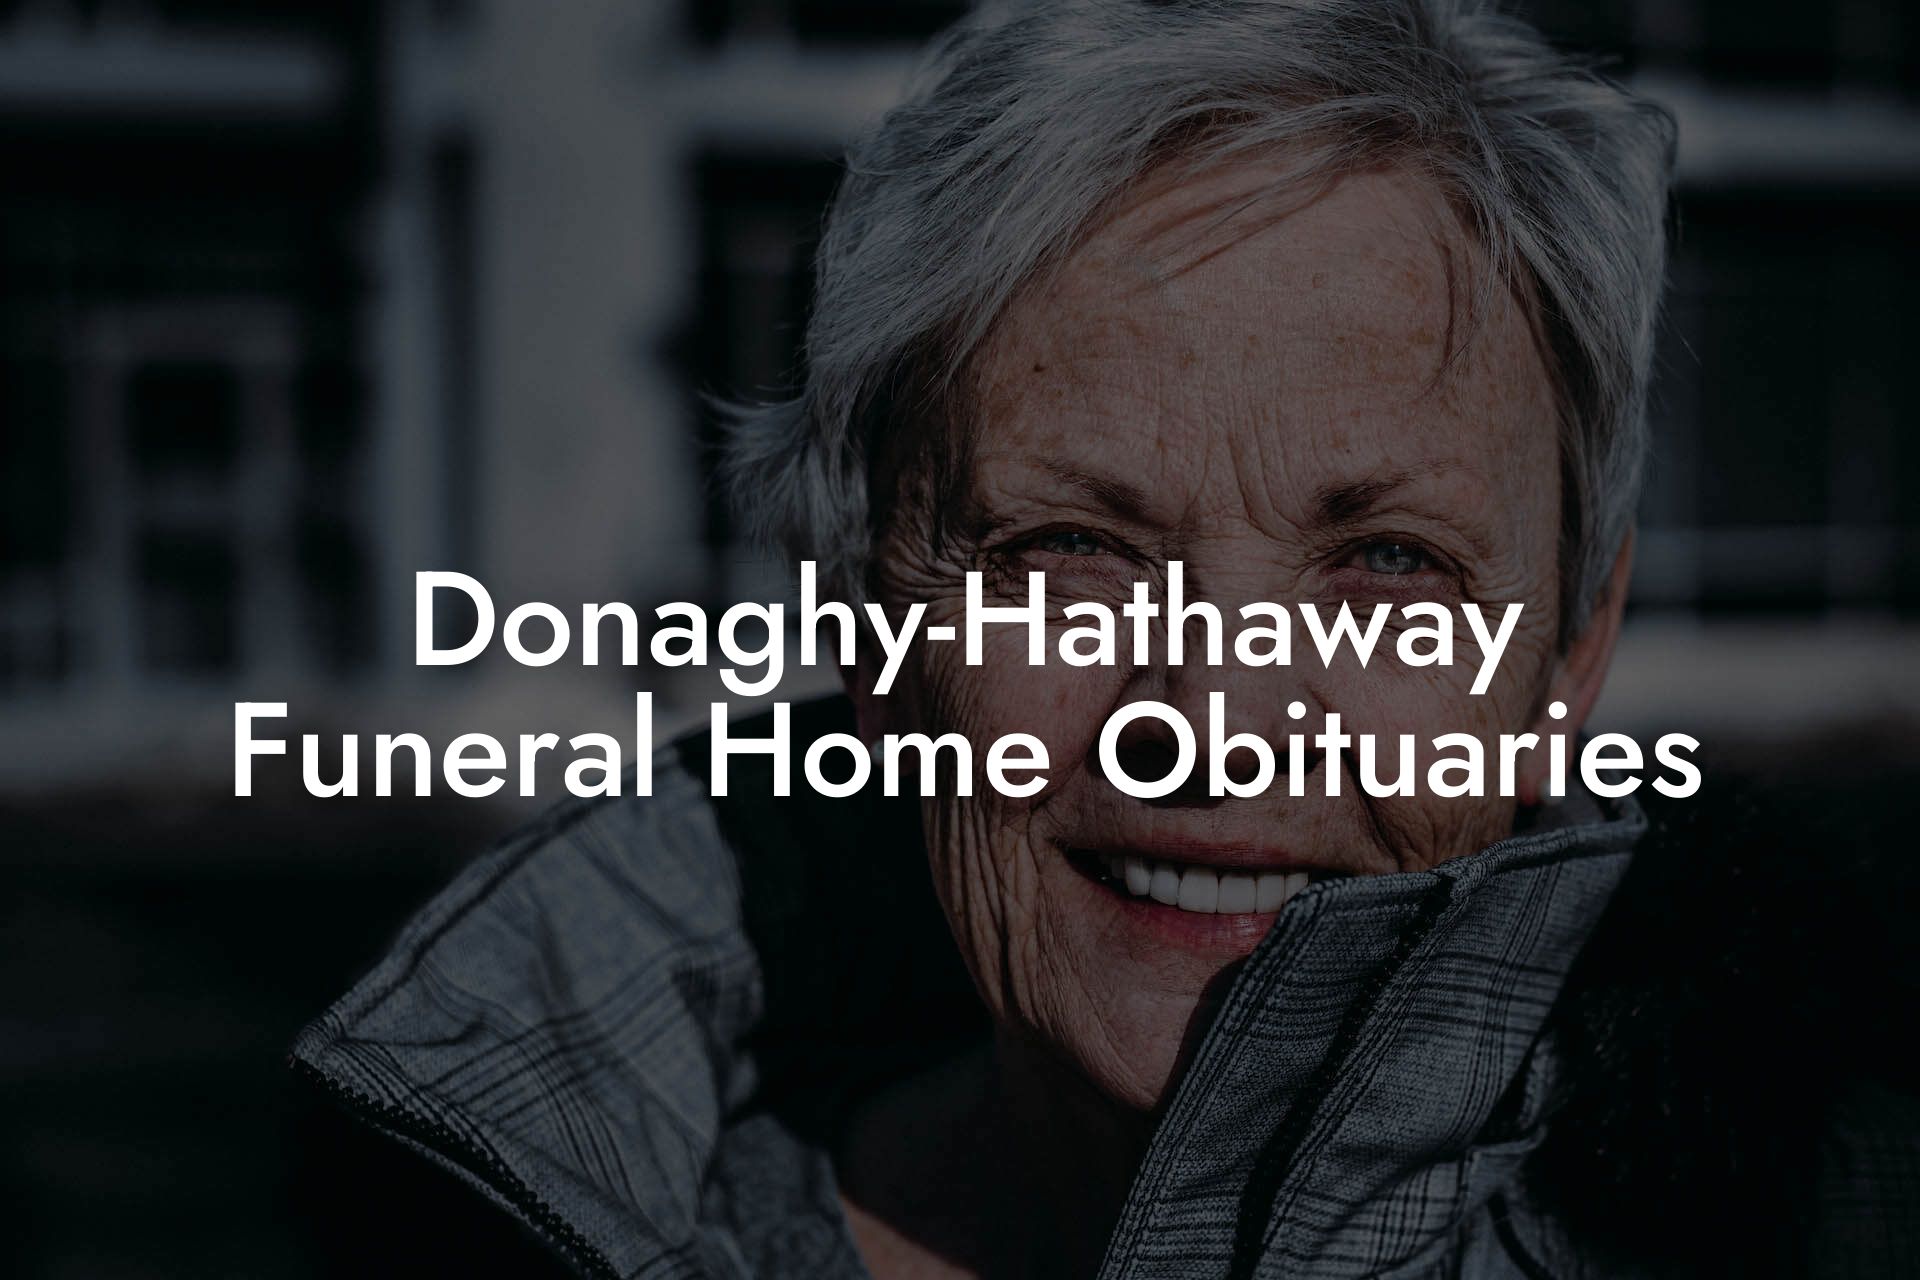 Donaghy-Hathaway Funeral Home Obituaries